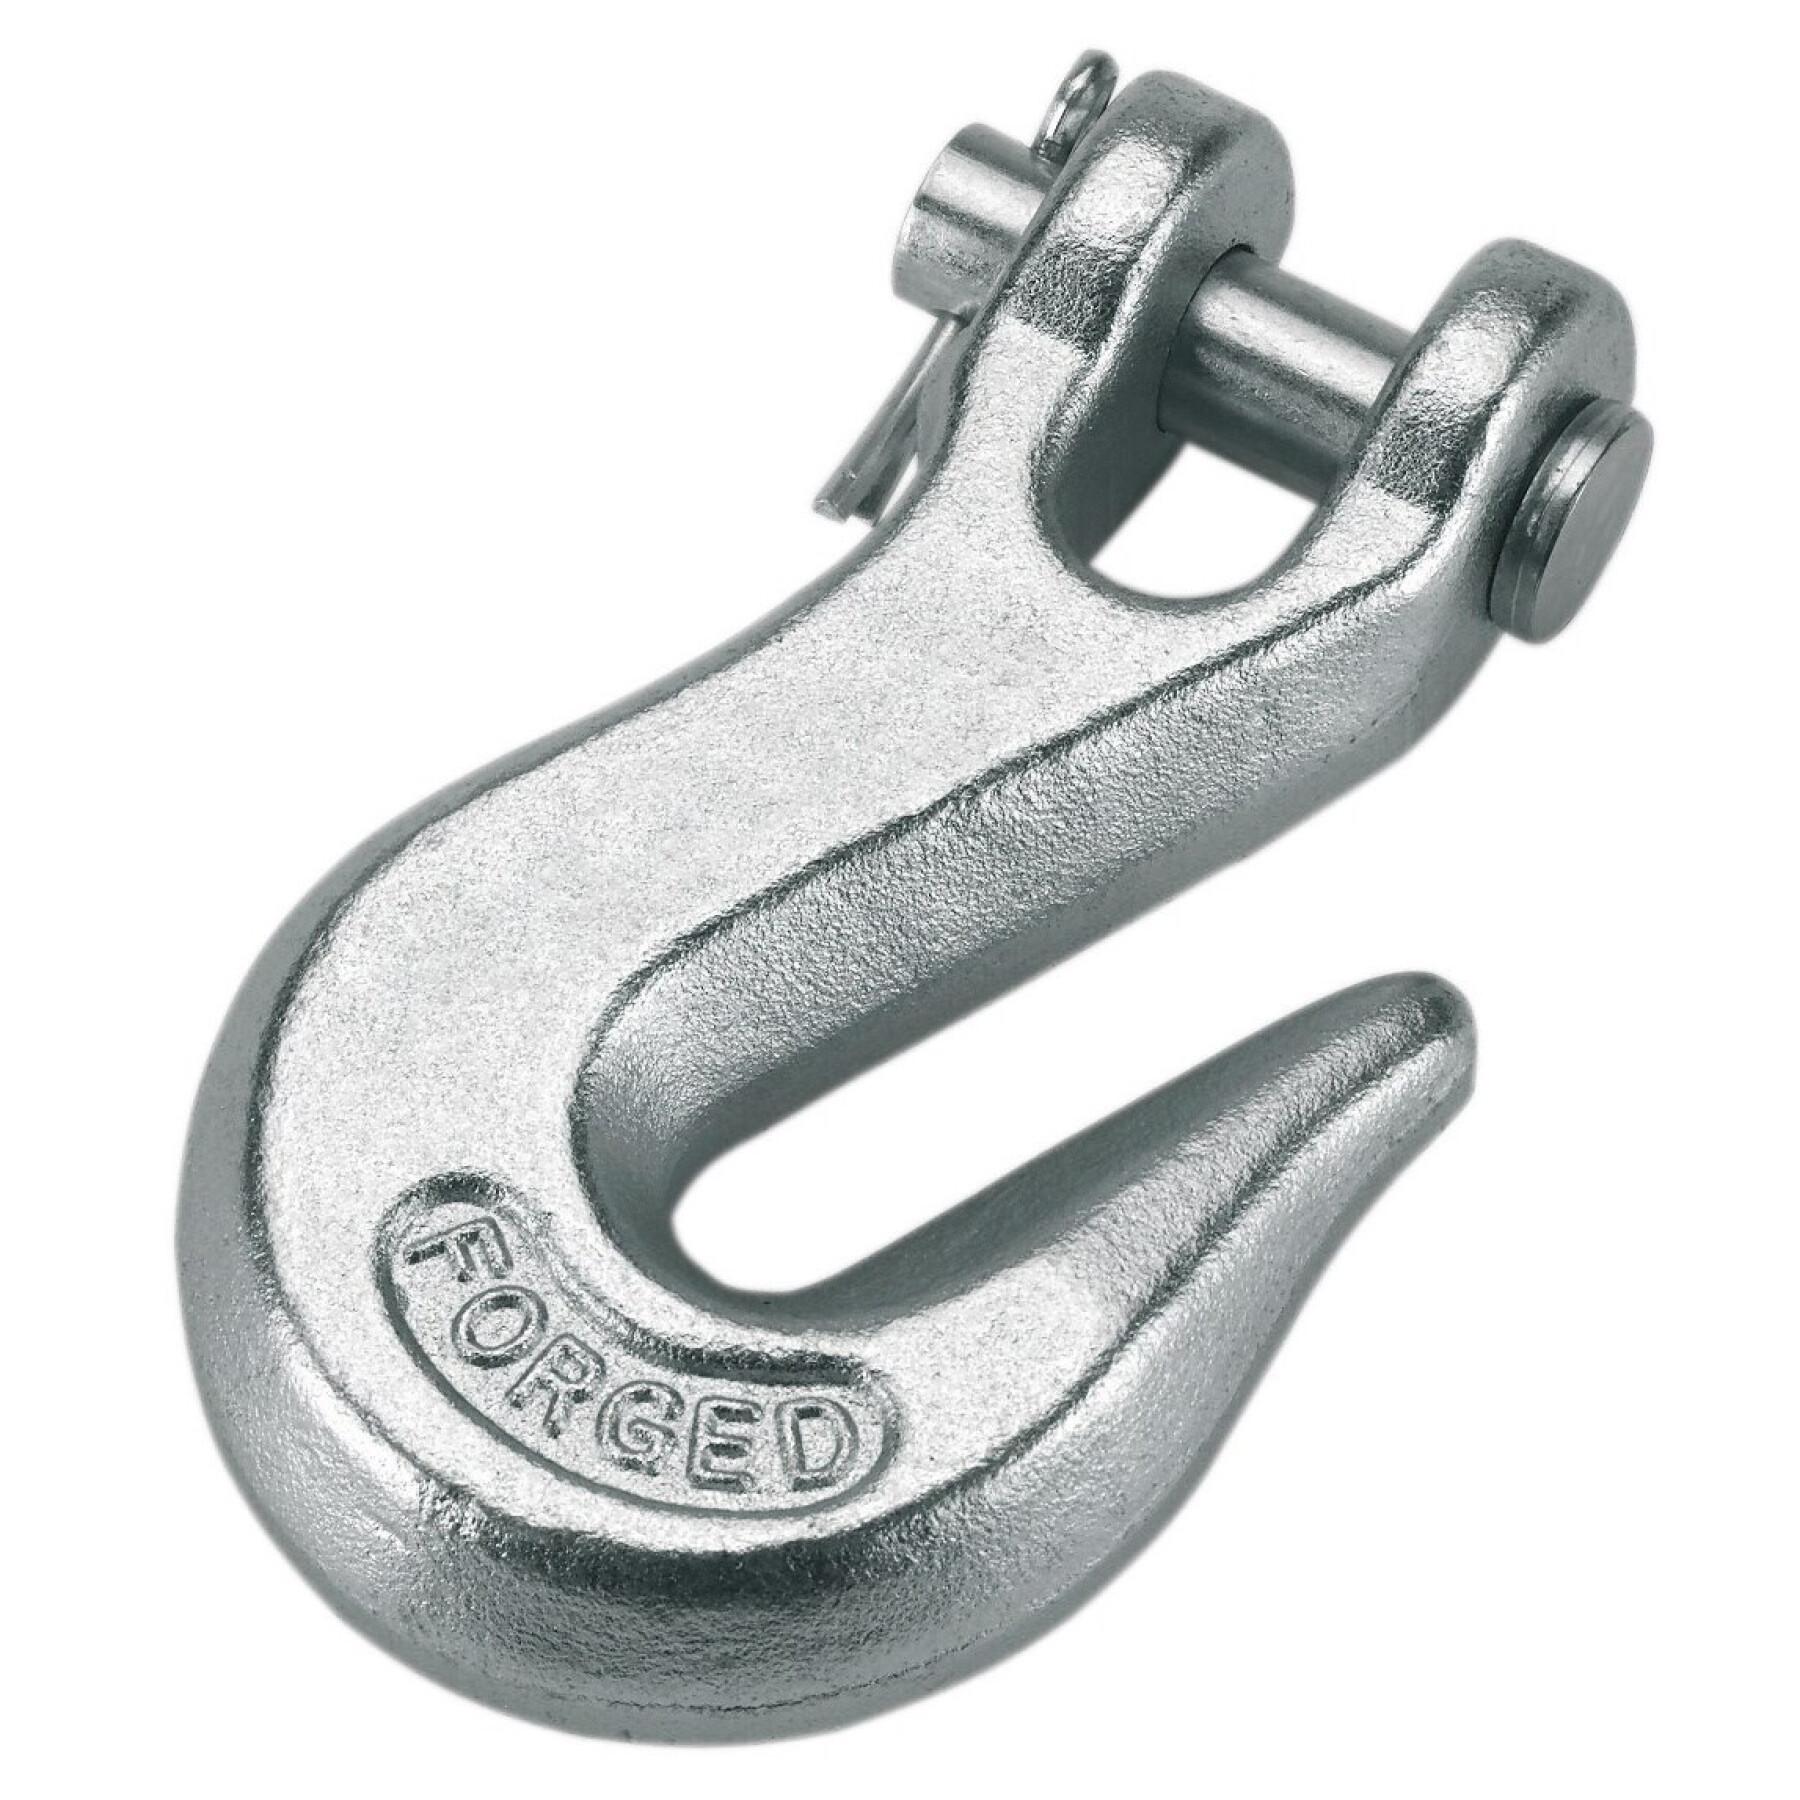 Lifting hook with chain pin - load 850 kg Kerbl